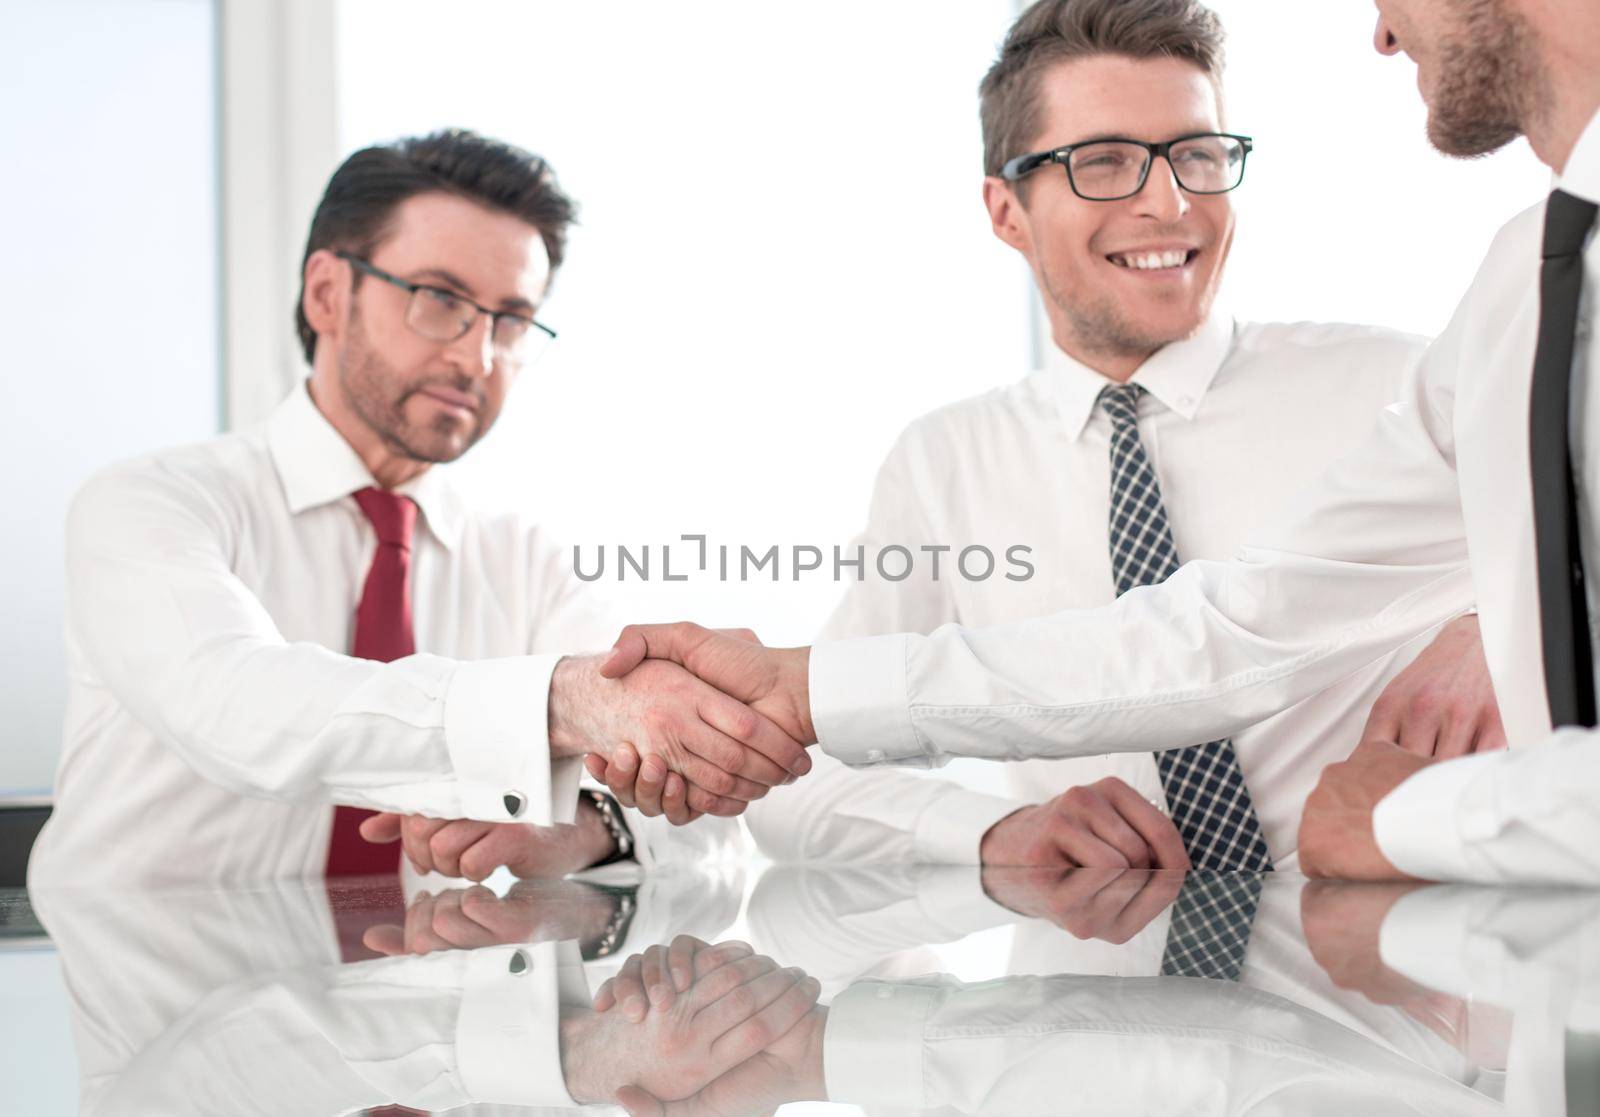 employees greet each other with a handshake. by asdf